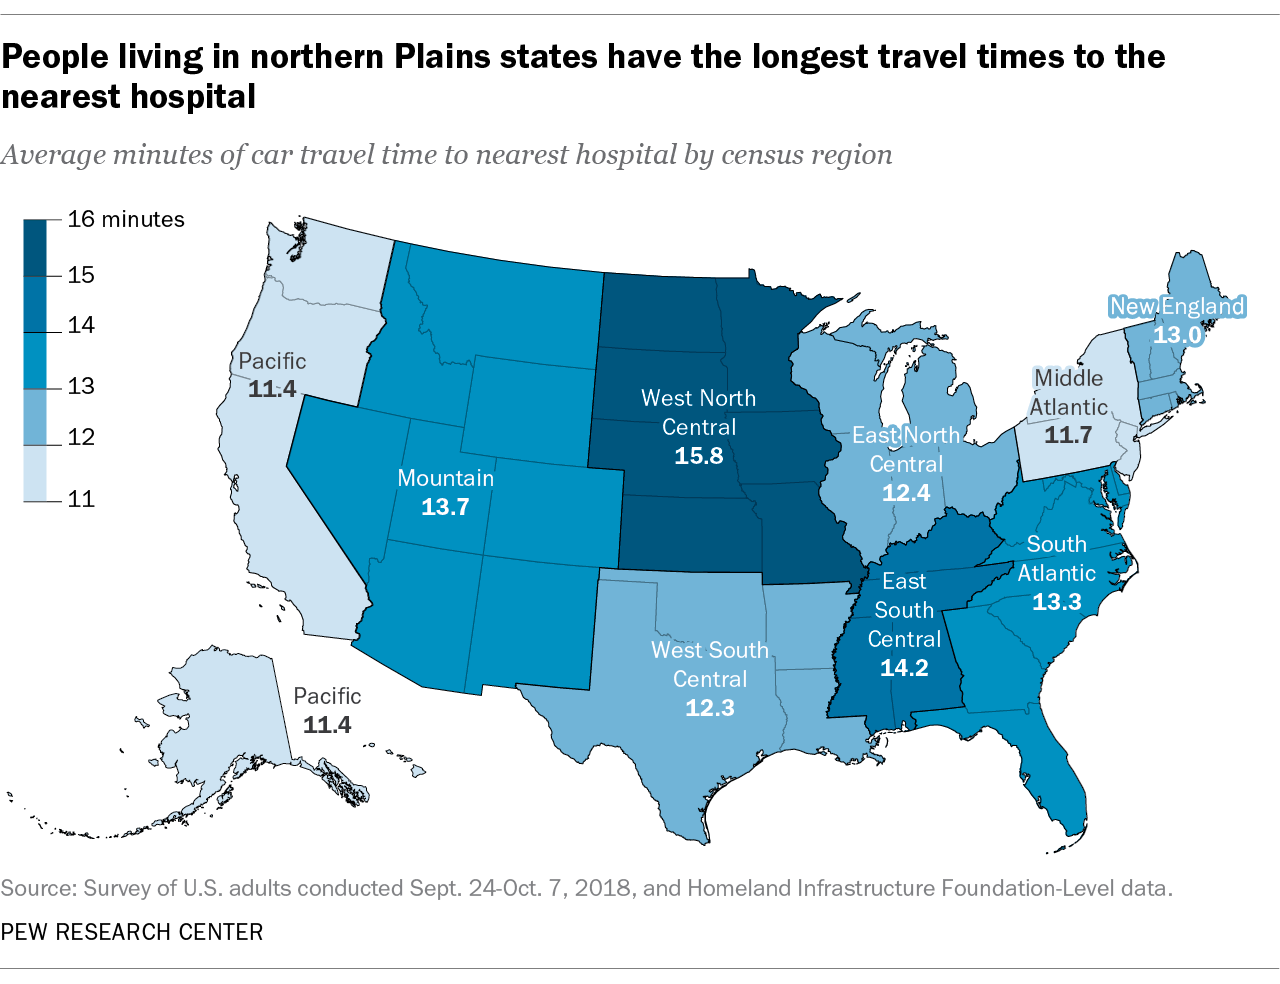 People living in northern Plains states have the longest travel times to the nearest hospital